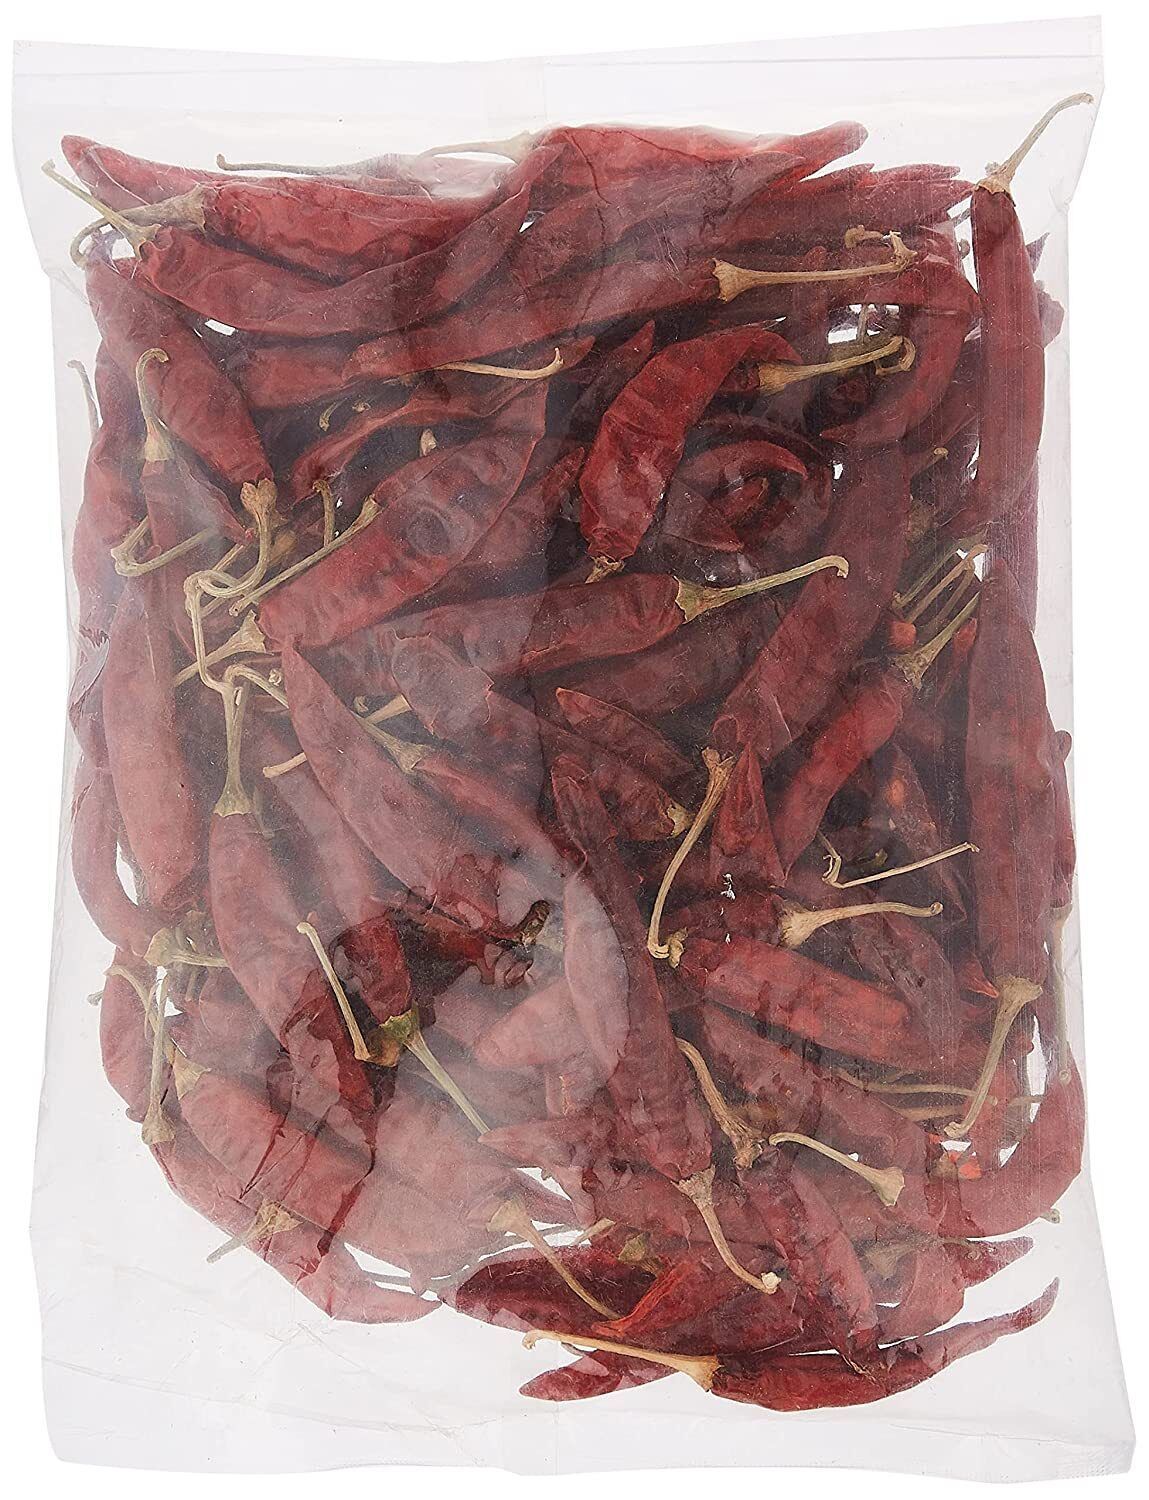 Generic Red Chili 1 KG ,Organically Grown Hand Picked Red chilli whole FREE SHIP - $39.59